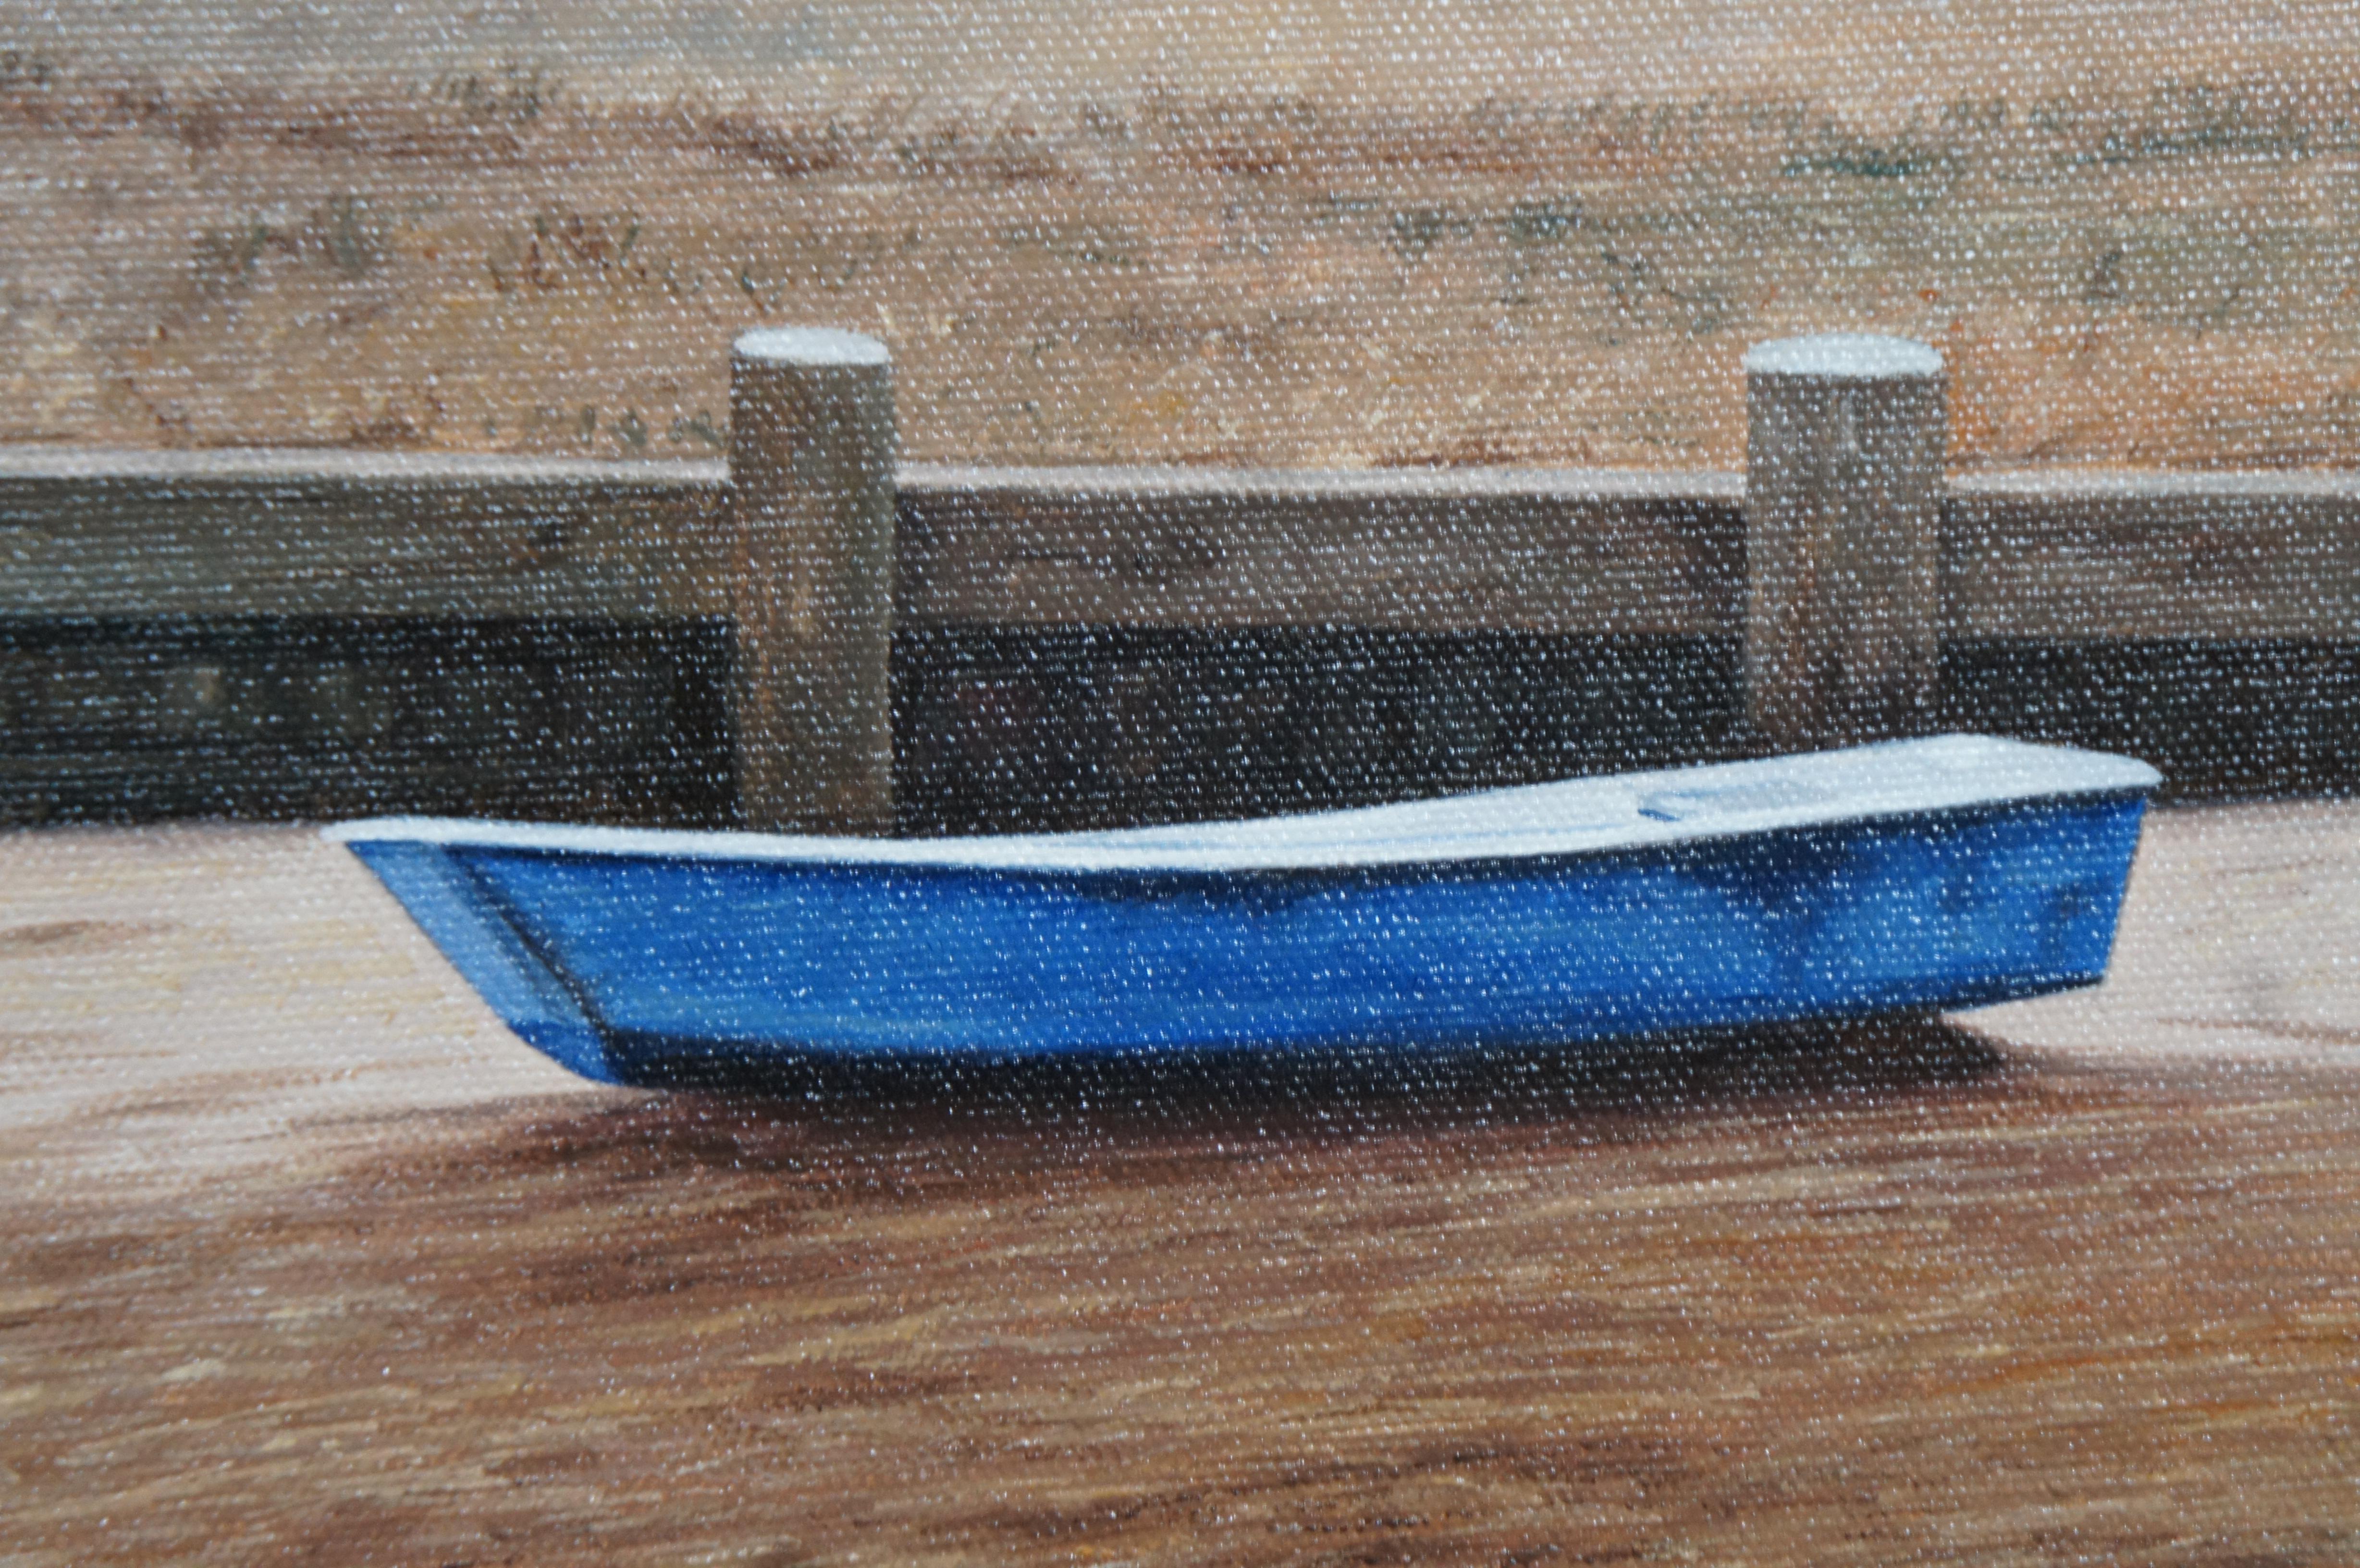 Michael McGovern Grounded Boats Beach Landscape Oil Painting on Canvas  For Sale 3